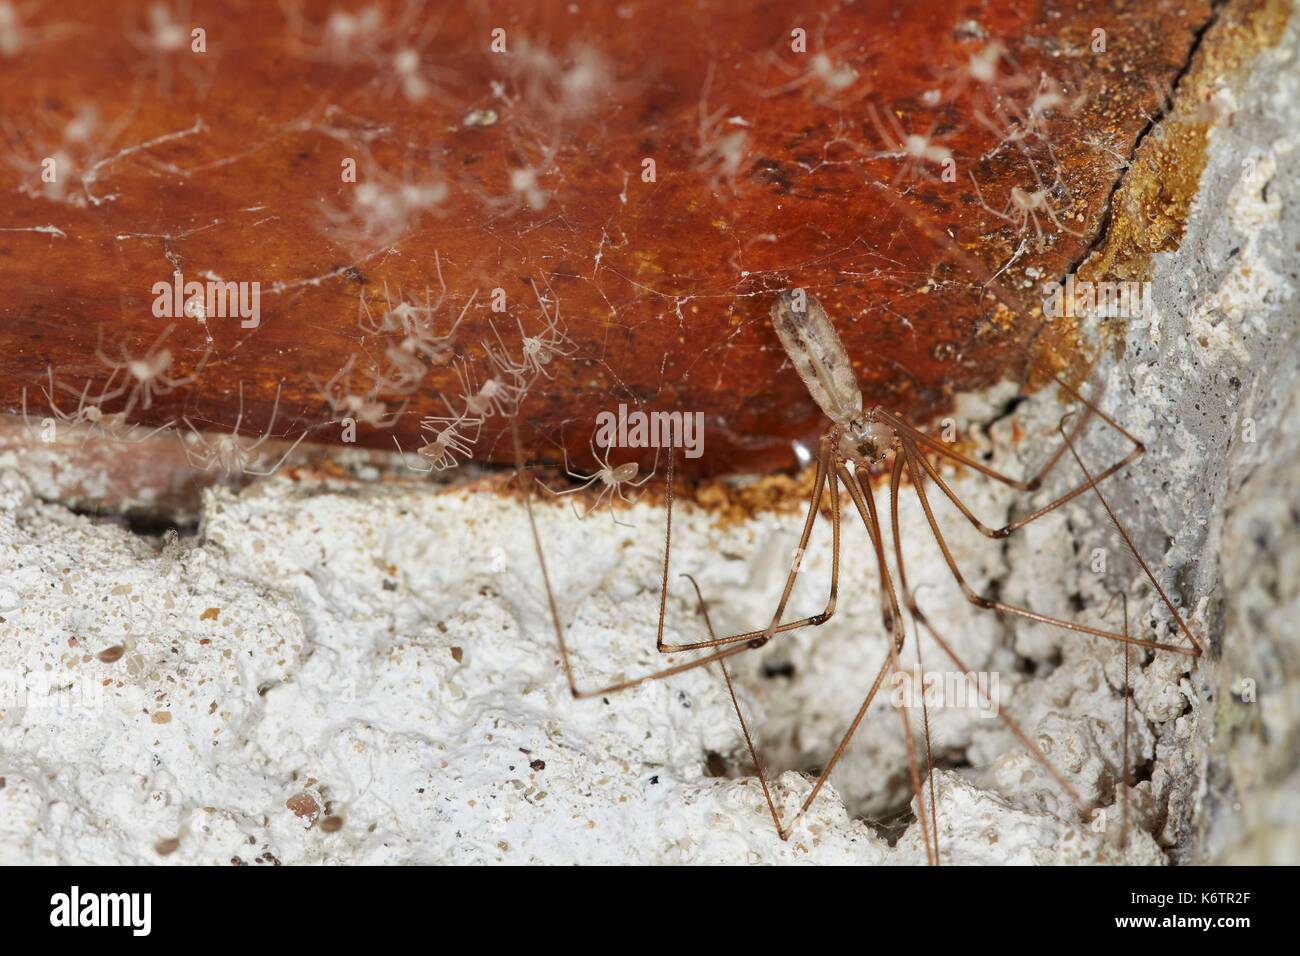 France, Morbihan, Araneae, Pholcidae, SpiderDaddy longlegs (Pholcus phalangioides), Female and its cubs Stock Photo